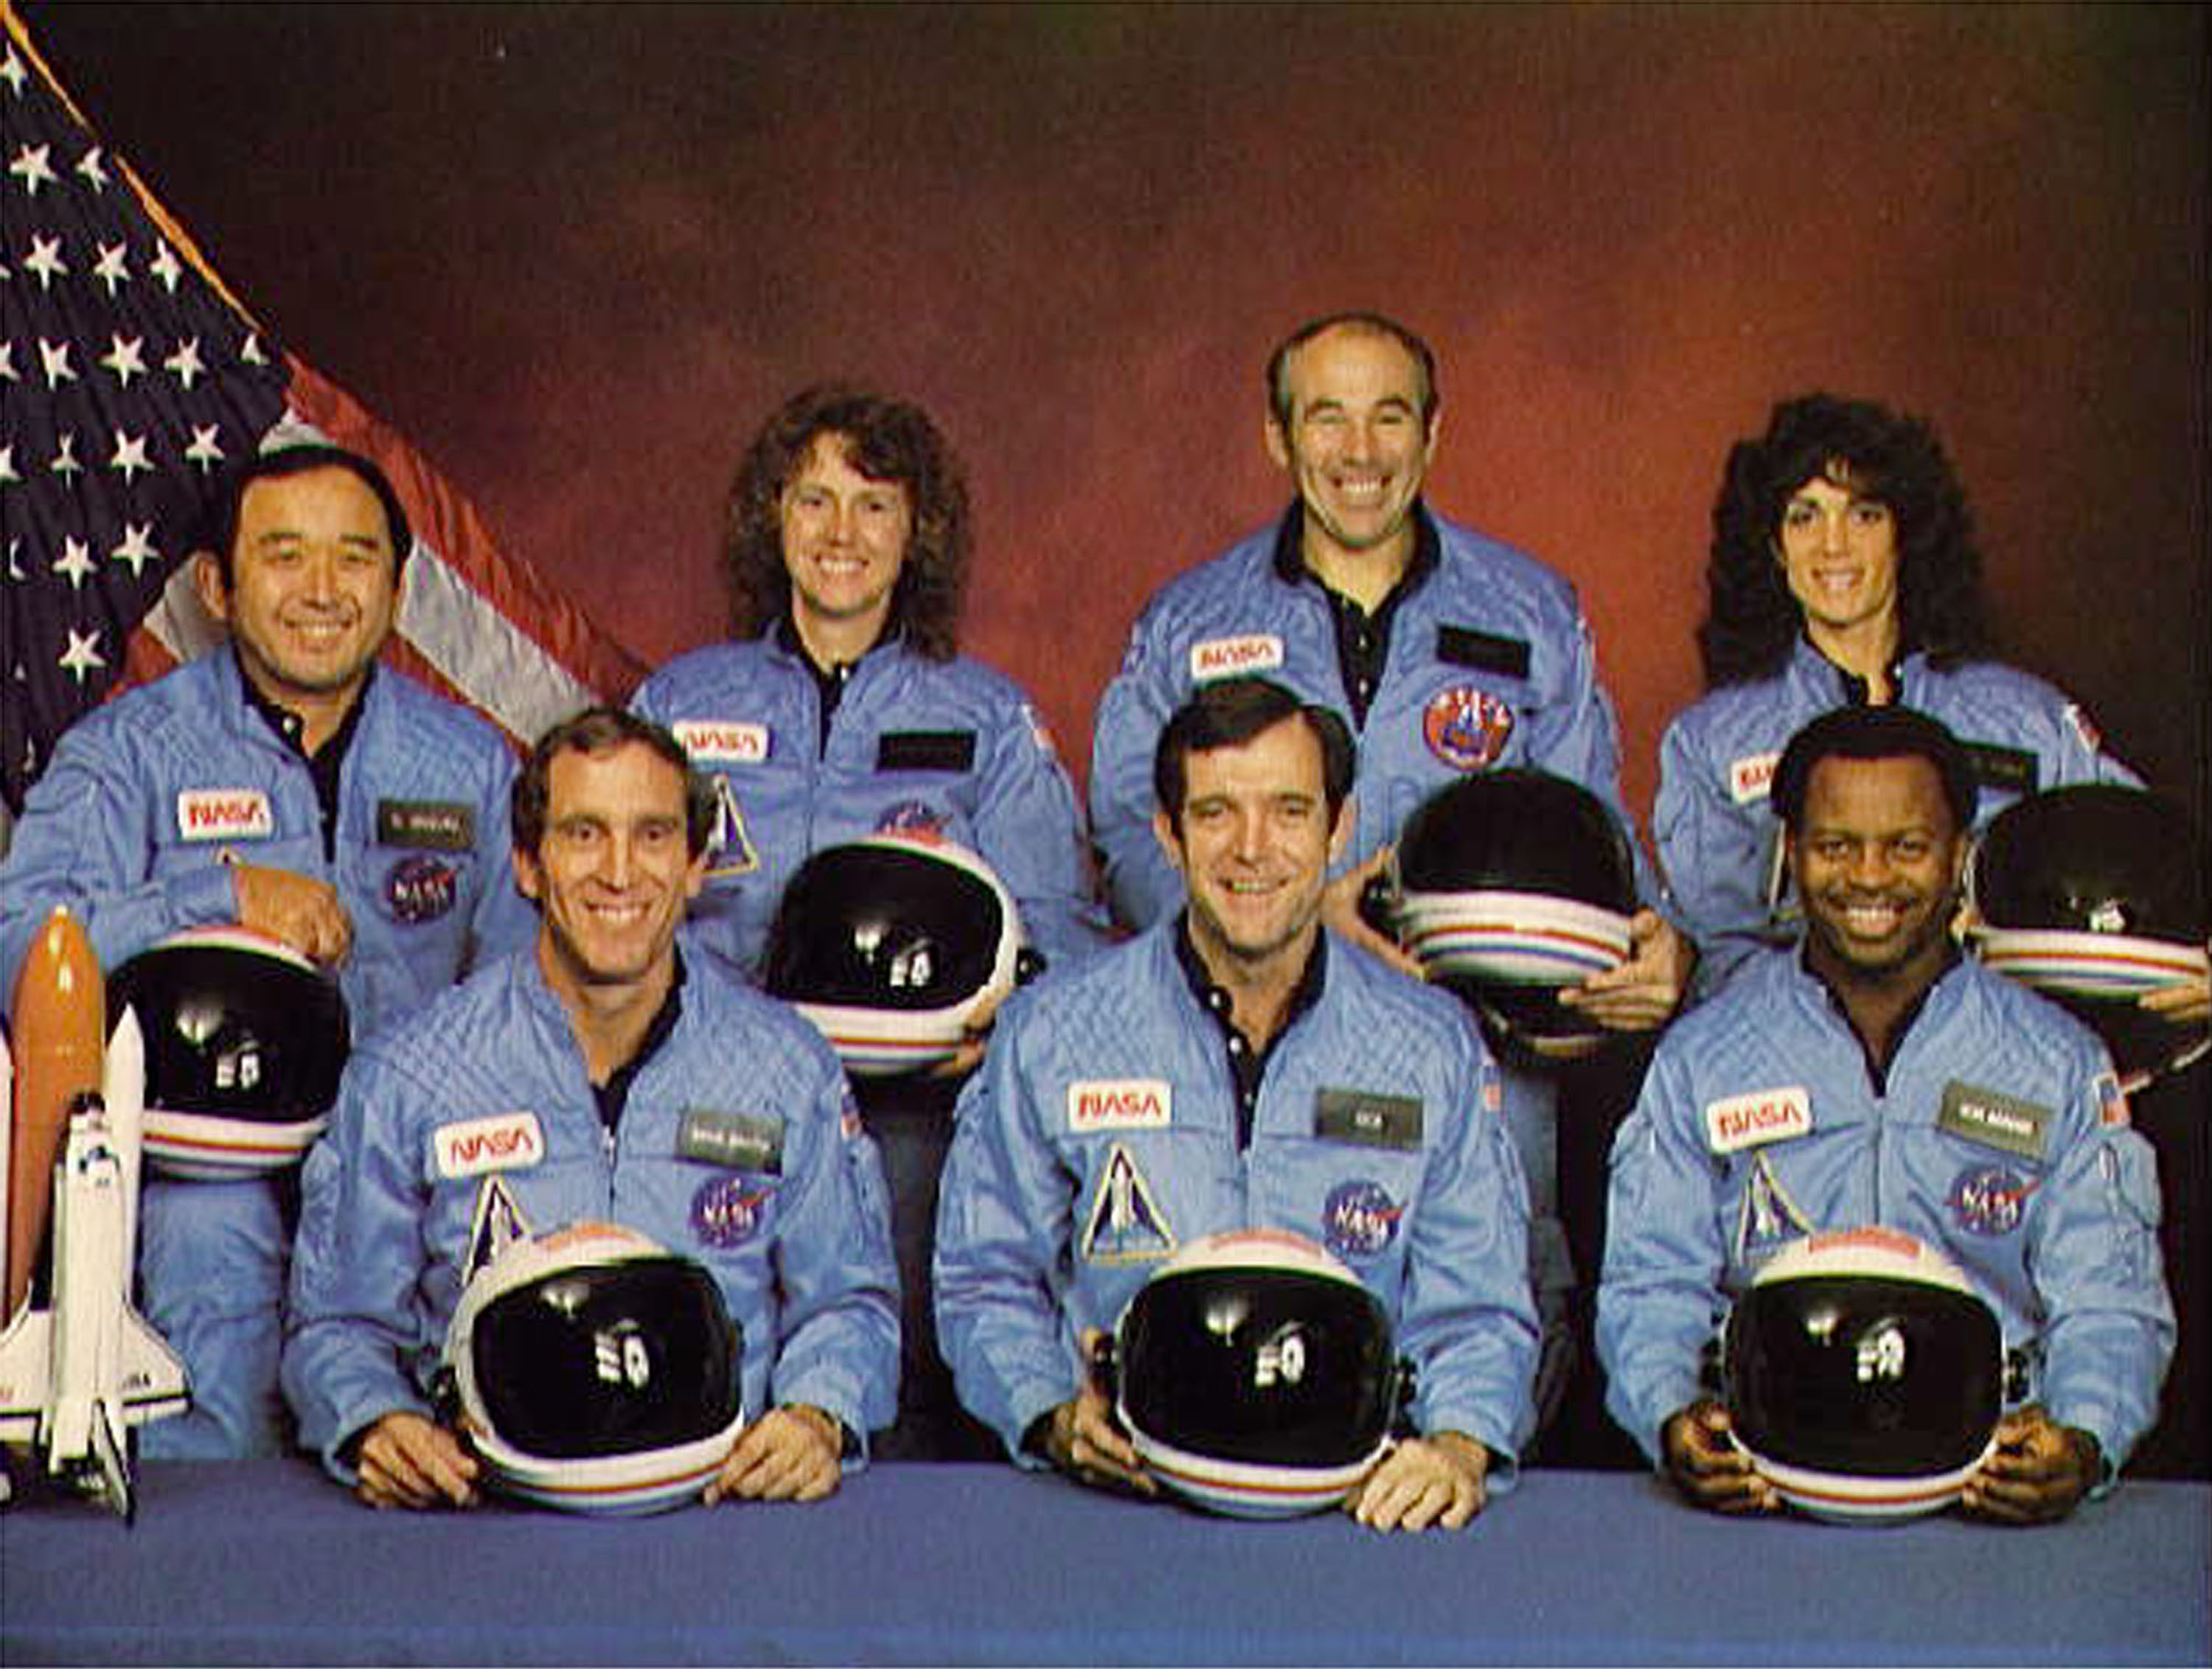 (FILE PHOTO)  Space Shuttle Challenger crew members gather for an official portrait November 11, 1985 in an unspecified location. (Back, L-R) Mission Specialist Ellison S. Onizuka, Teacher-in-Space participant Sharon Christa McAuliffe, Payload Specialist Greg Jarvis and mission specialist Judy Resnick. (Front, L-R) Pilot Mike Smith, commander Dick Scobee and mission specialist Ron McNair. The Challenger and its seven member crew were lost seventy three seconds after launch when a booster rocket failed.  (Photo by NASA/Getty Images)